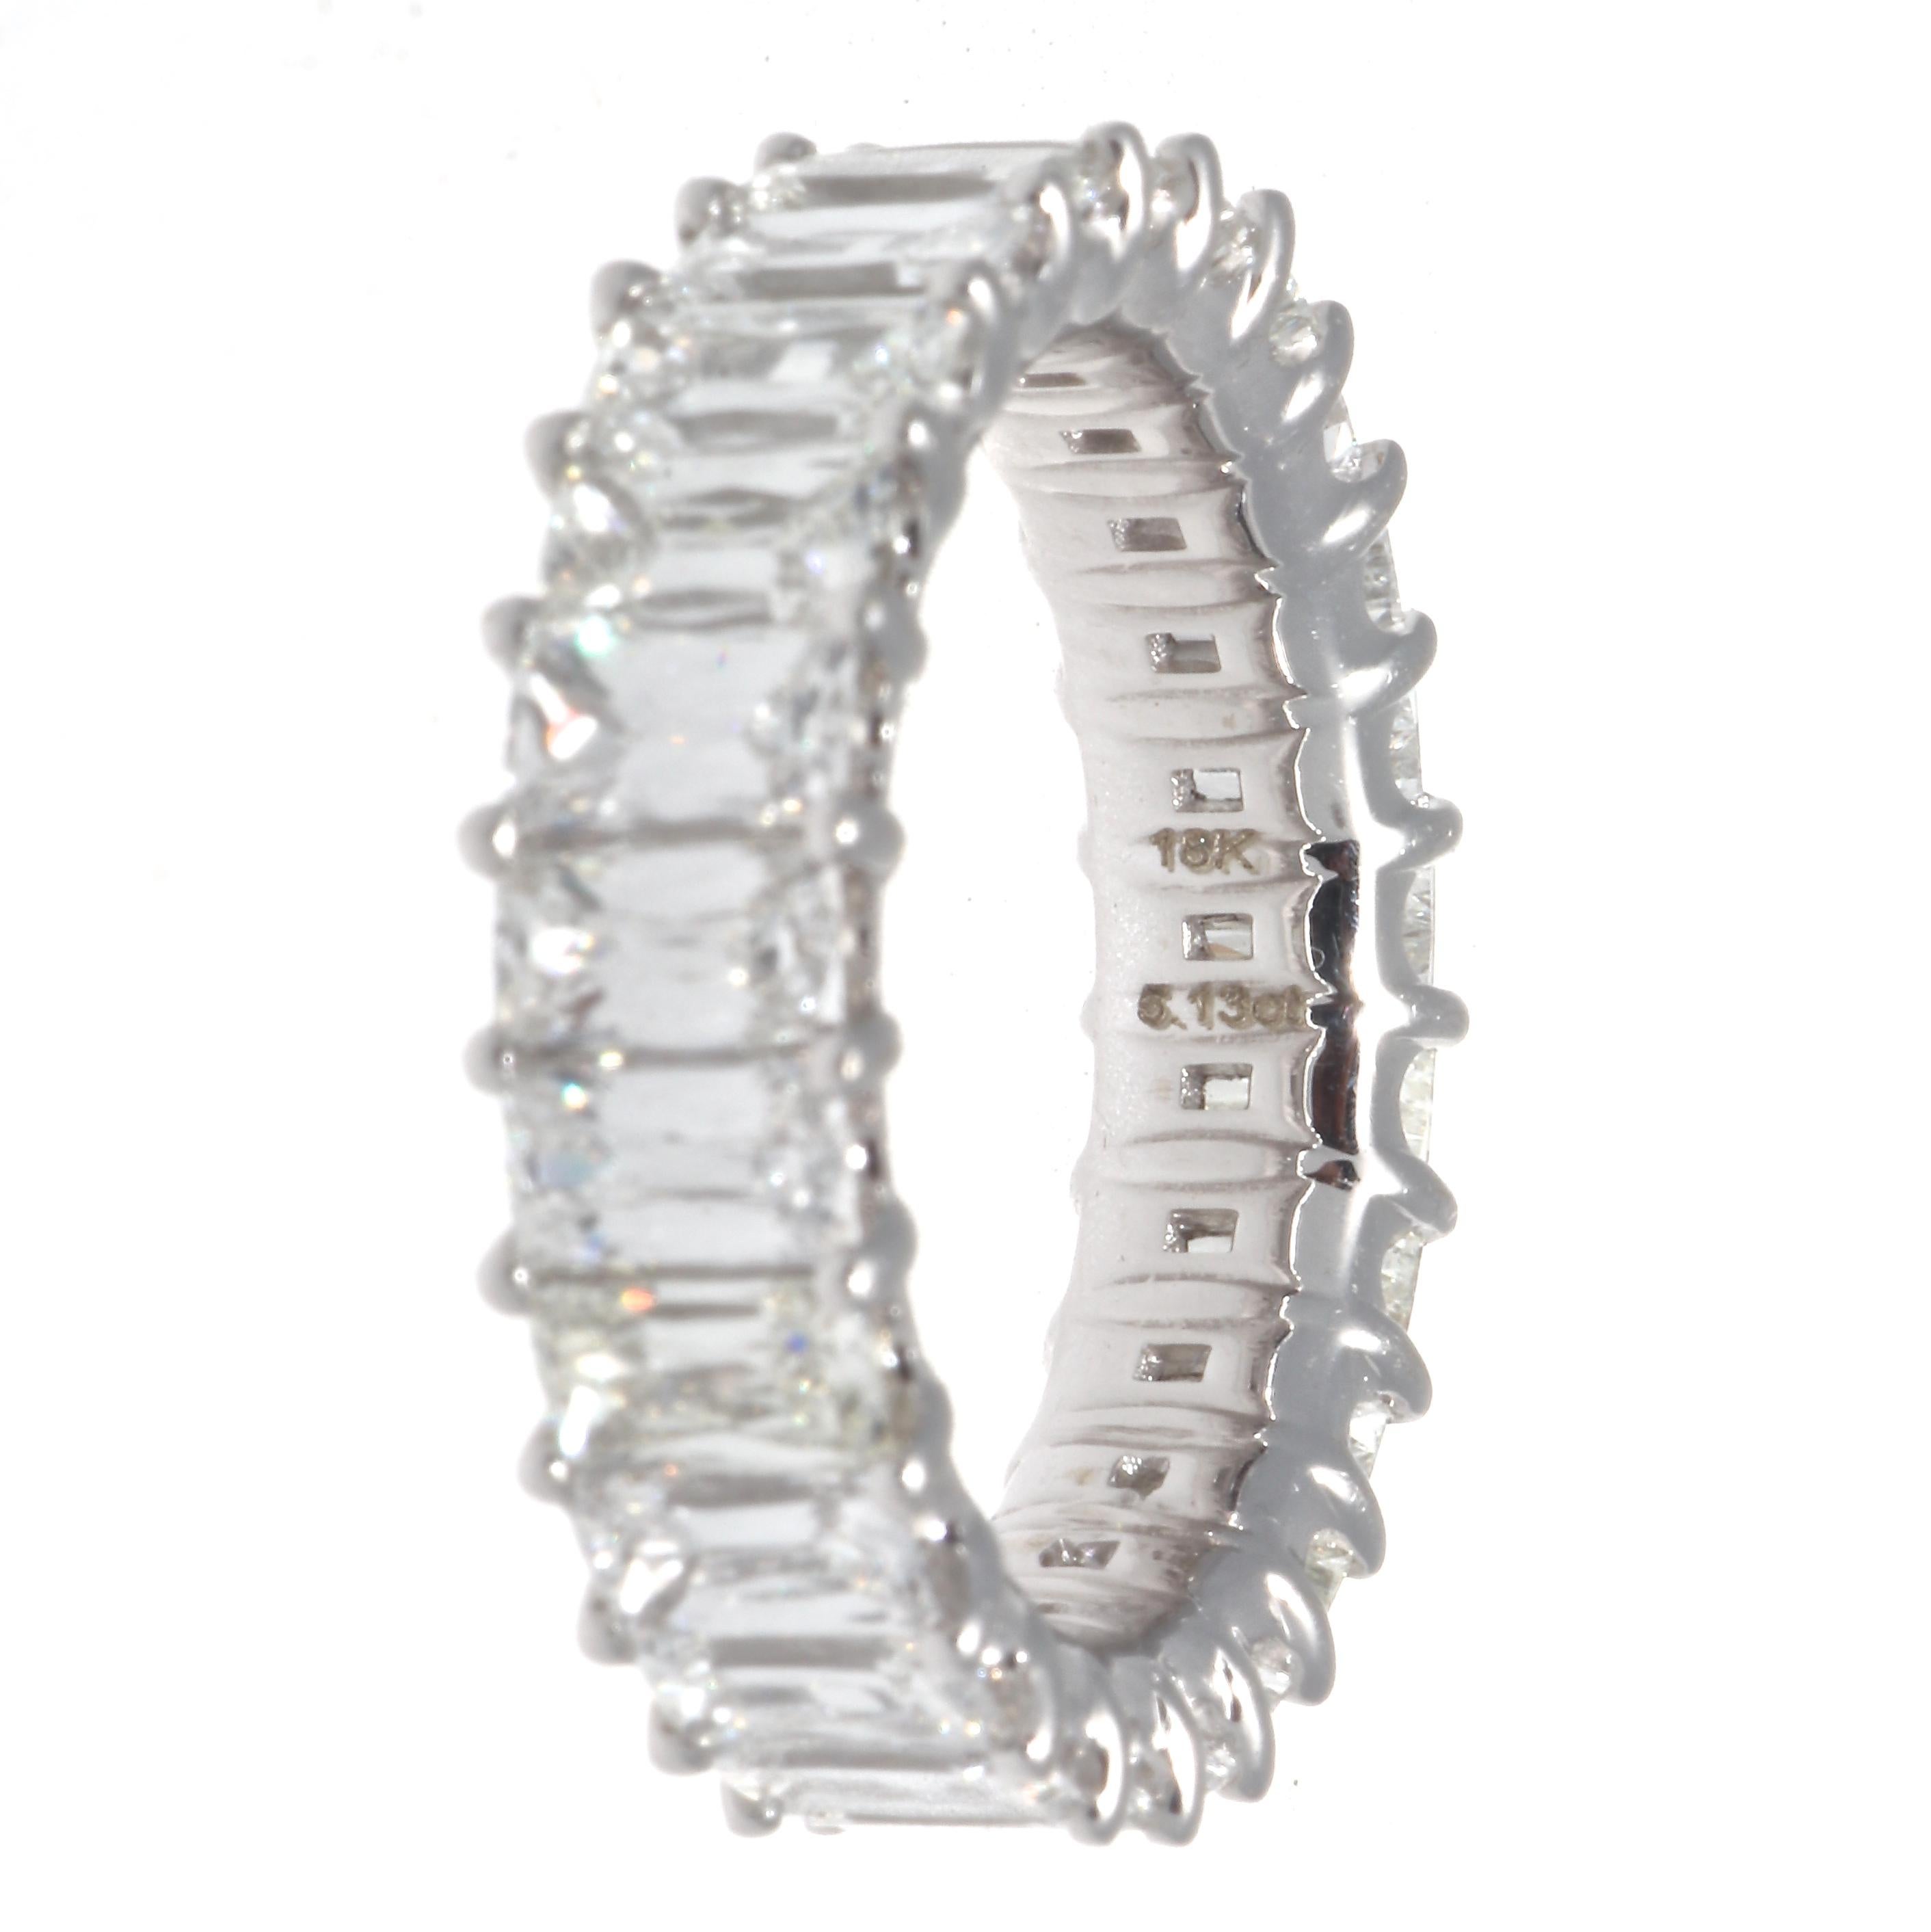 Modern triple cut diamond 18k white gold eternity ring band. Featuring 18 diamonds that weigh approximately 5.13 carats, graded G-H color, VS clarity. Circa 2019. Size 6 and cannot be resized. 
Our 1stdibs Recognized Dealer/Platinum Seller